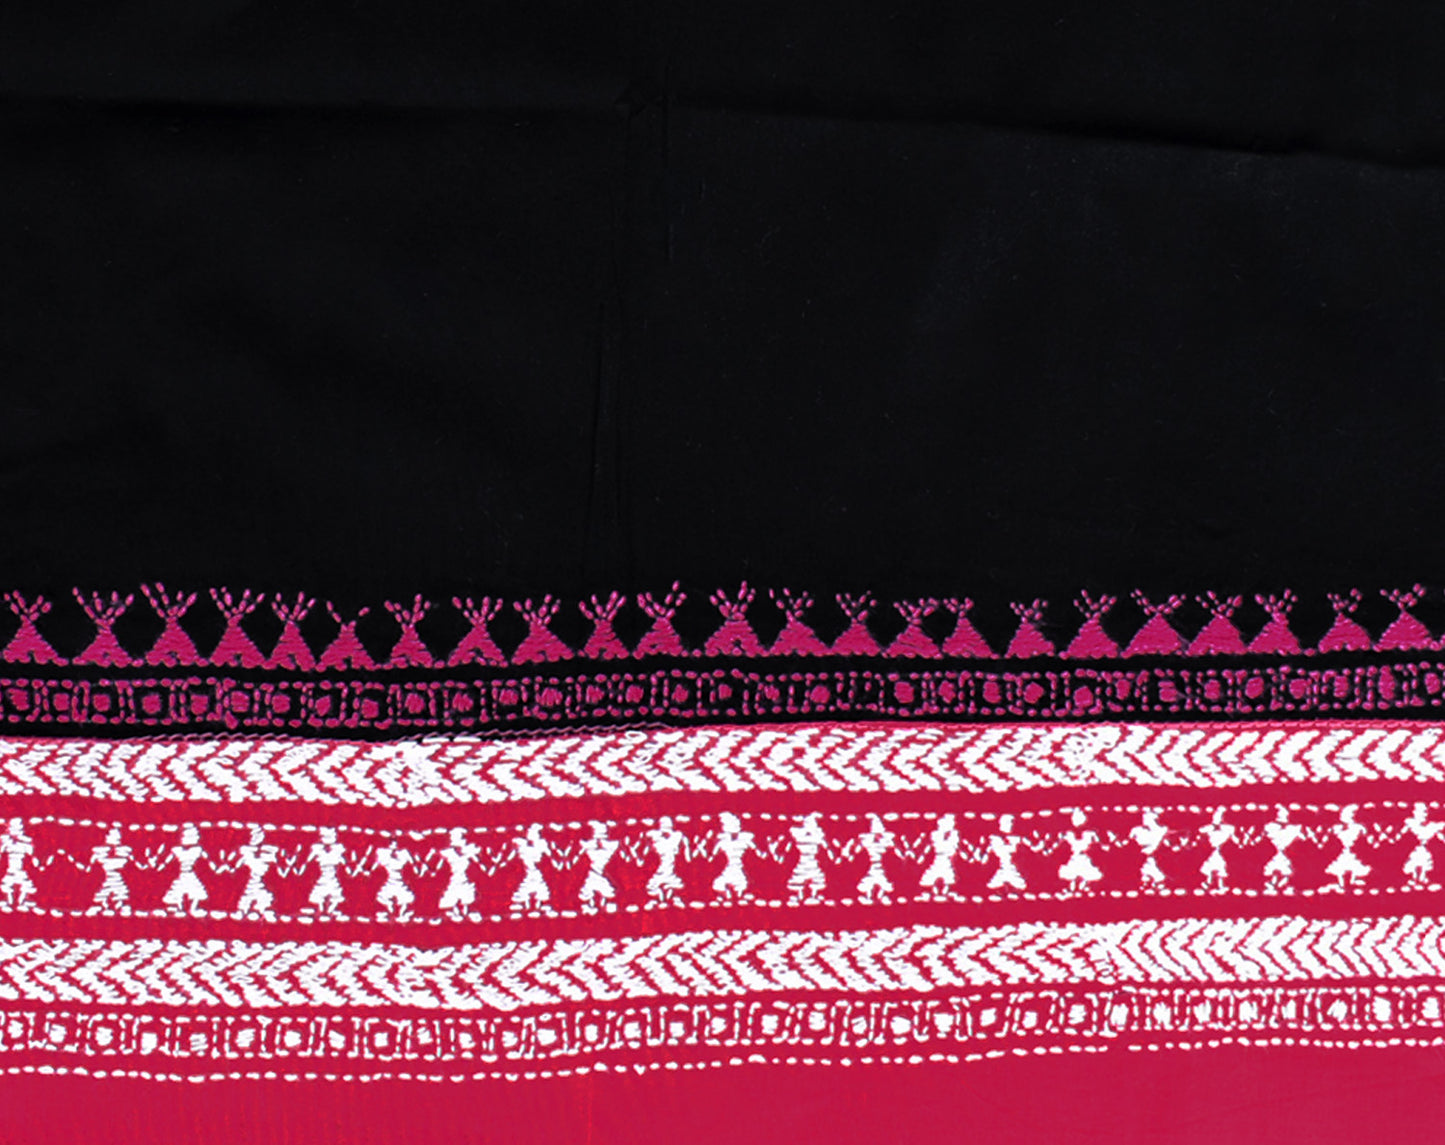 Cotton Blouse fabric with Bengal Kantha Hand Embroidery work